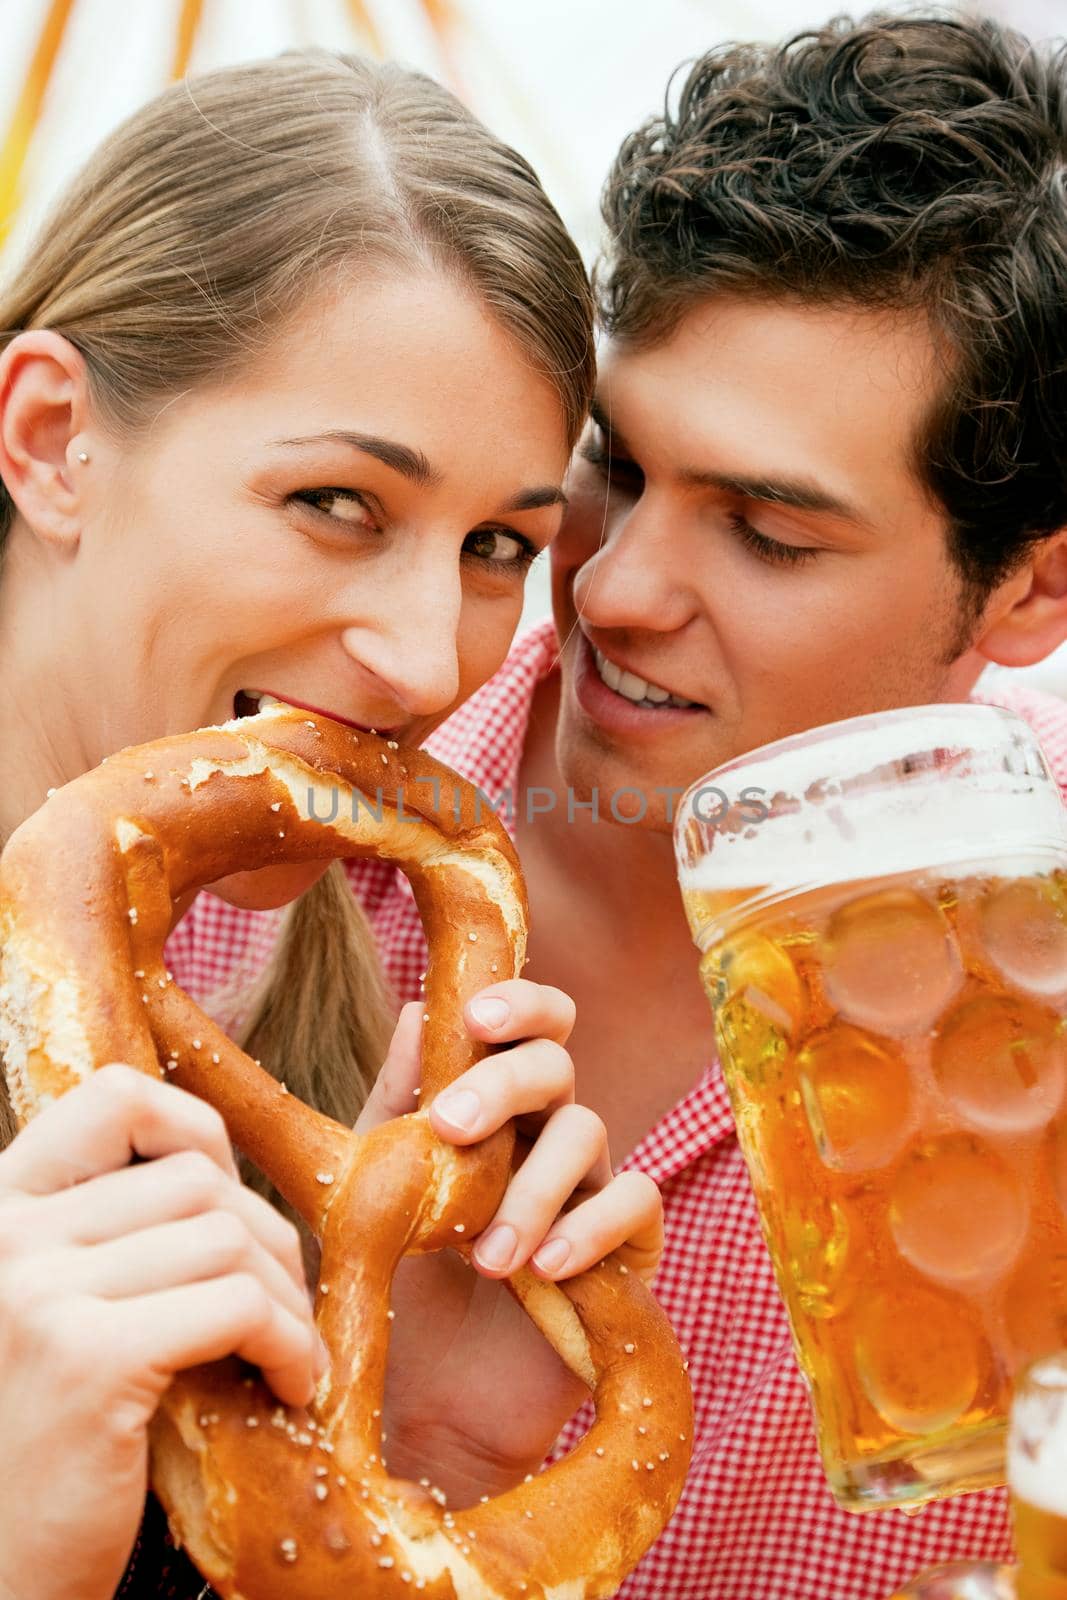 Couple in traditional German costume in a beer tent, he is having a drink, she a pretzel, scene could be located at the Oktoberfest or any Dult